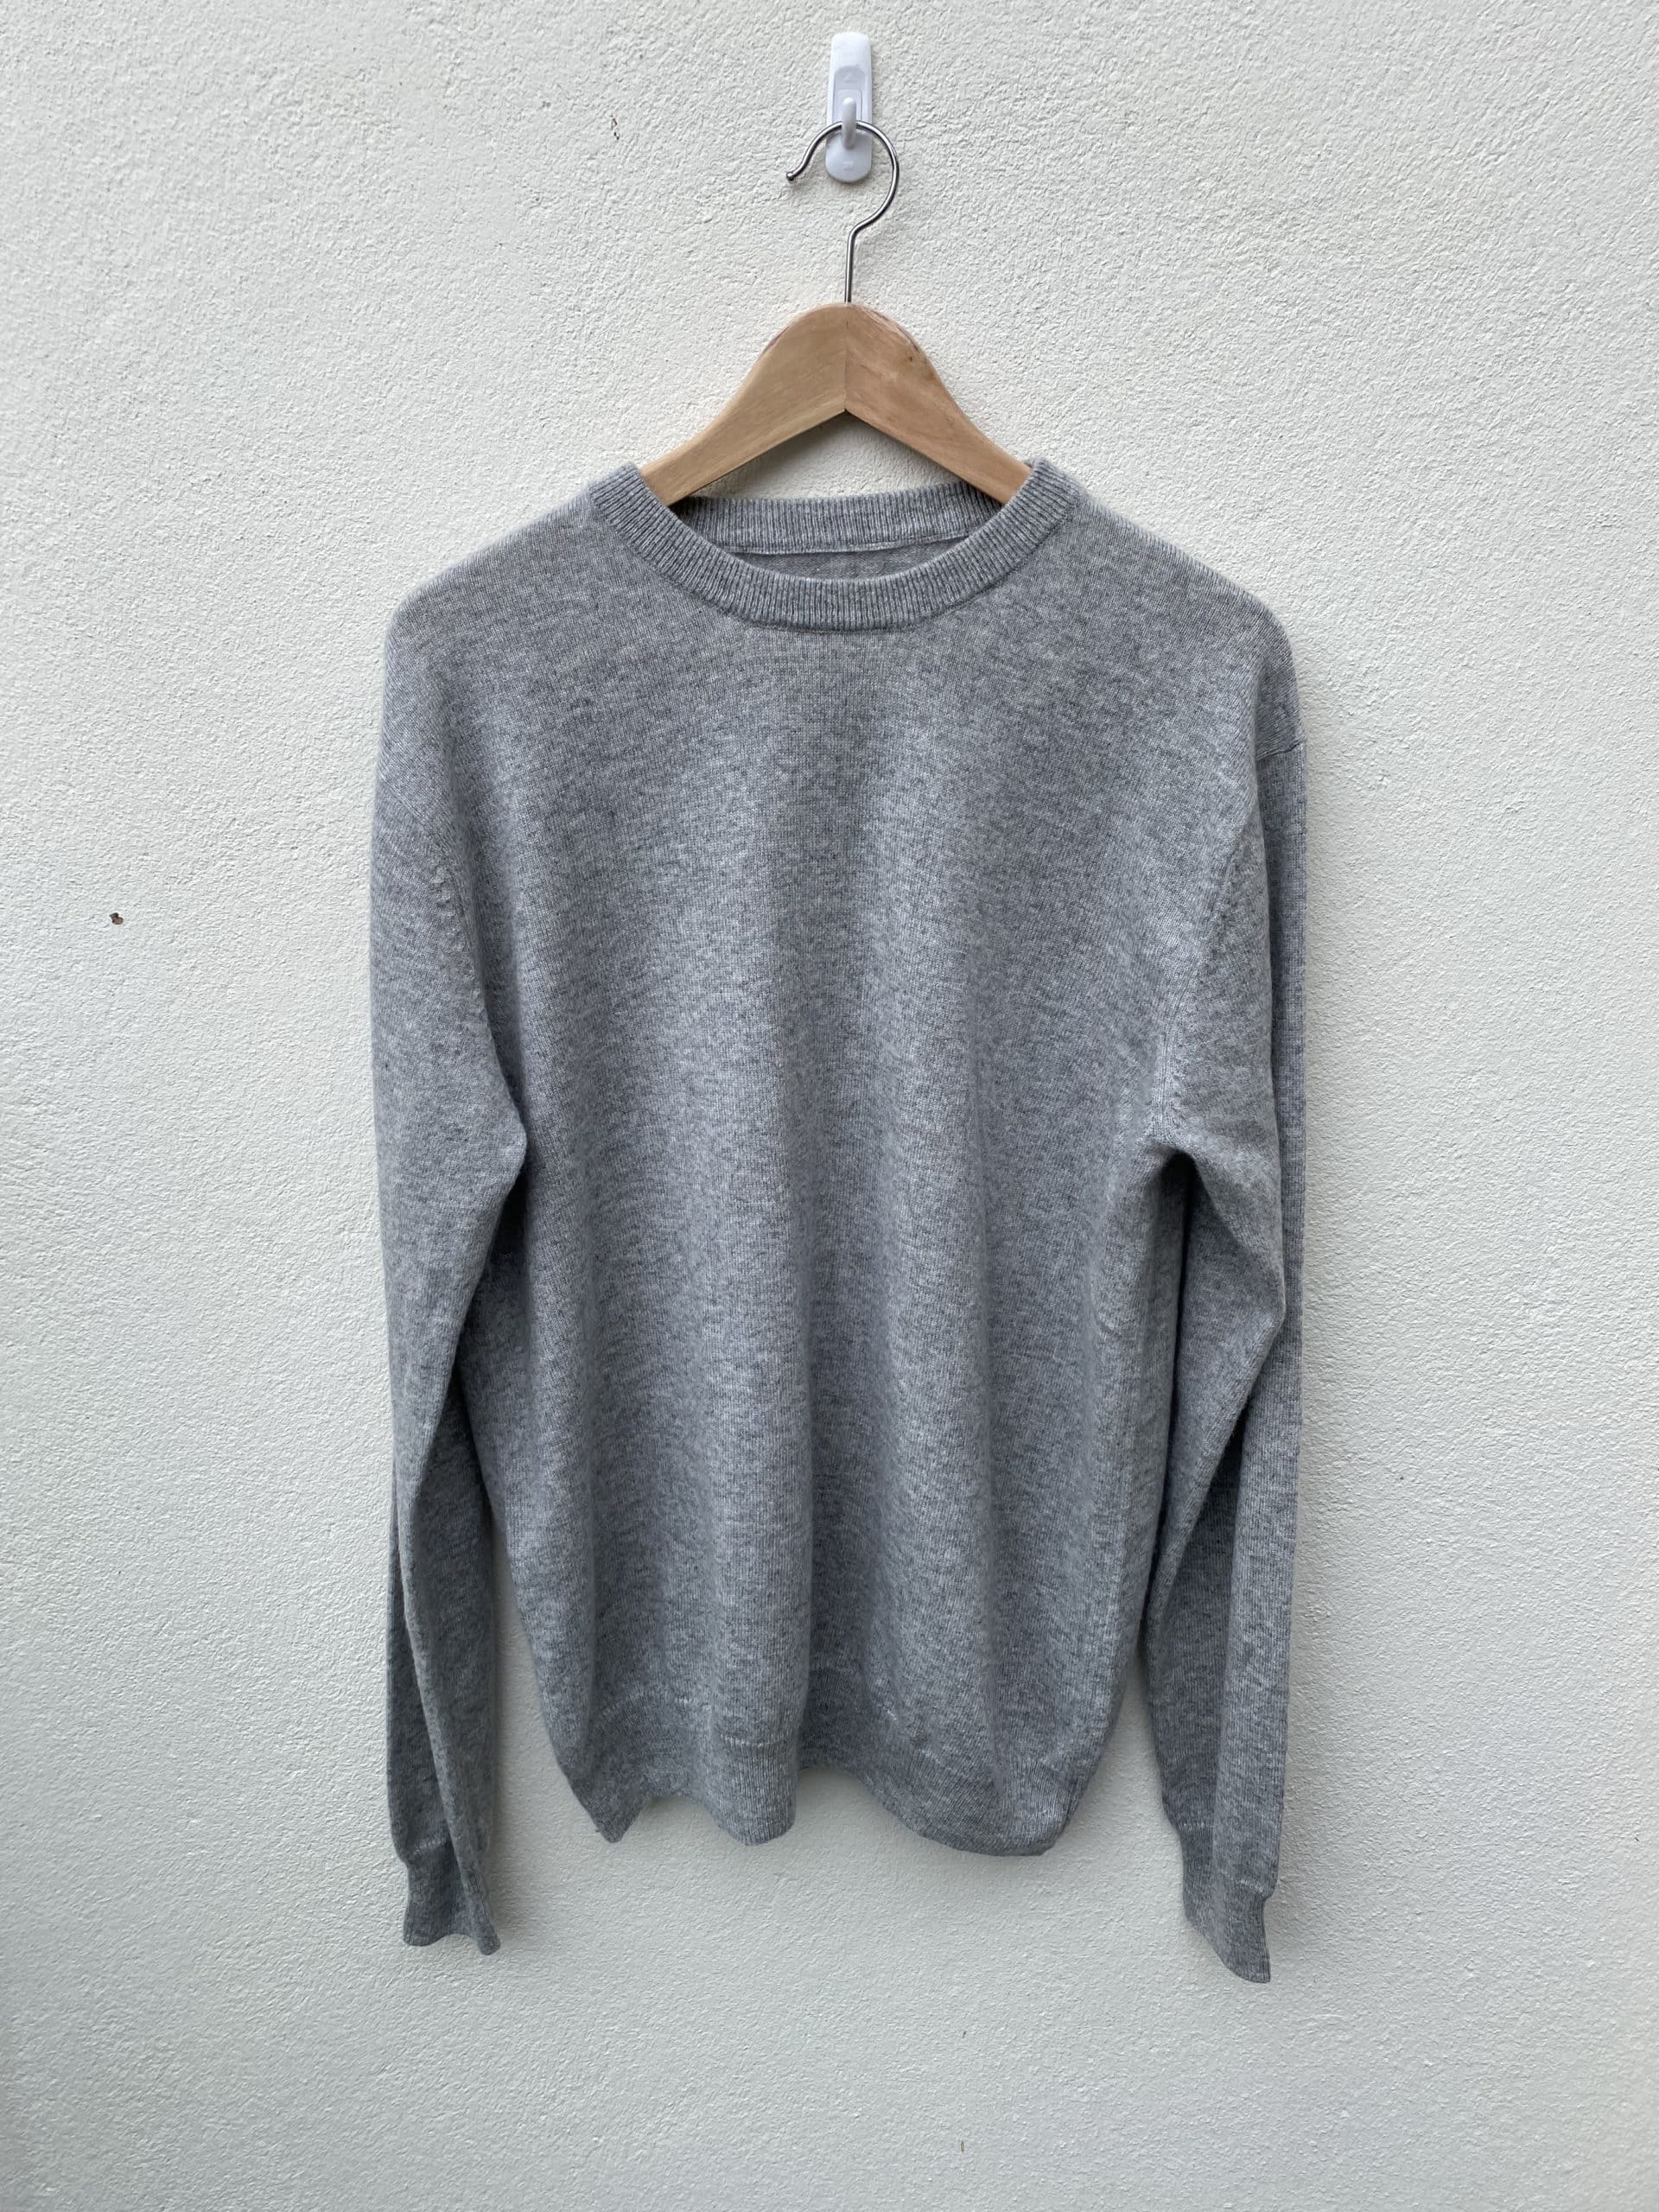 MEN’S CASHMERE SWEATER - Lonely Goat Cashmere